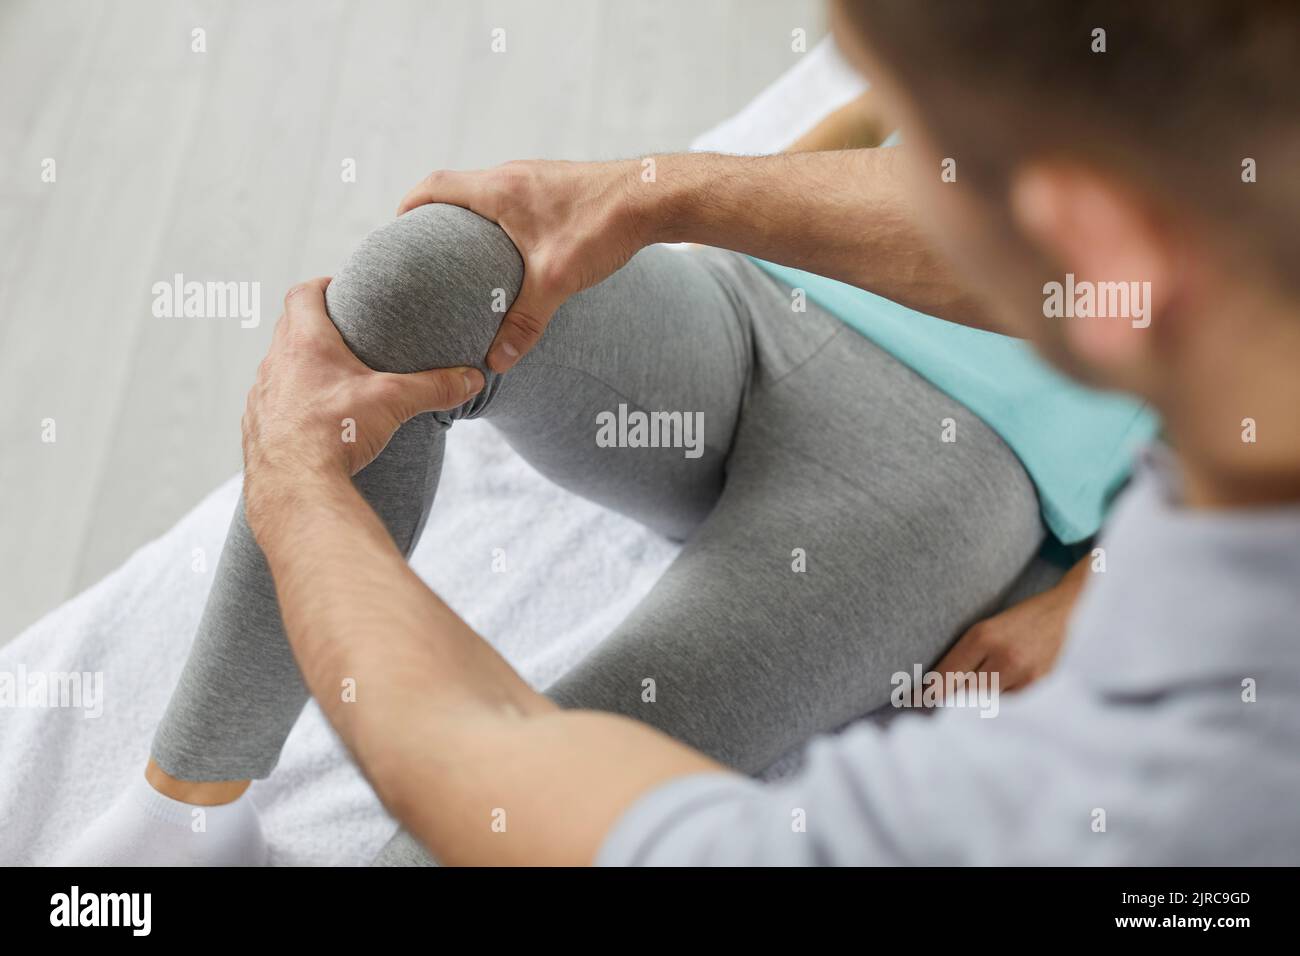 Physiotherapist or chiropractor at physiotherapy clinic examining patient's knee Stock Photo